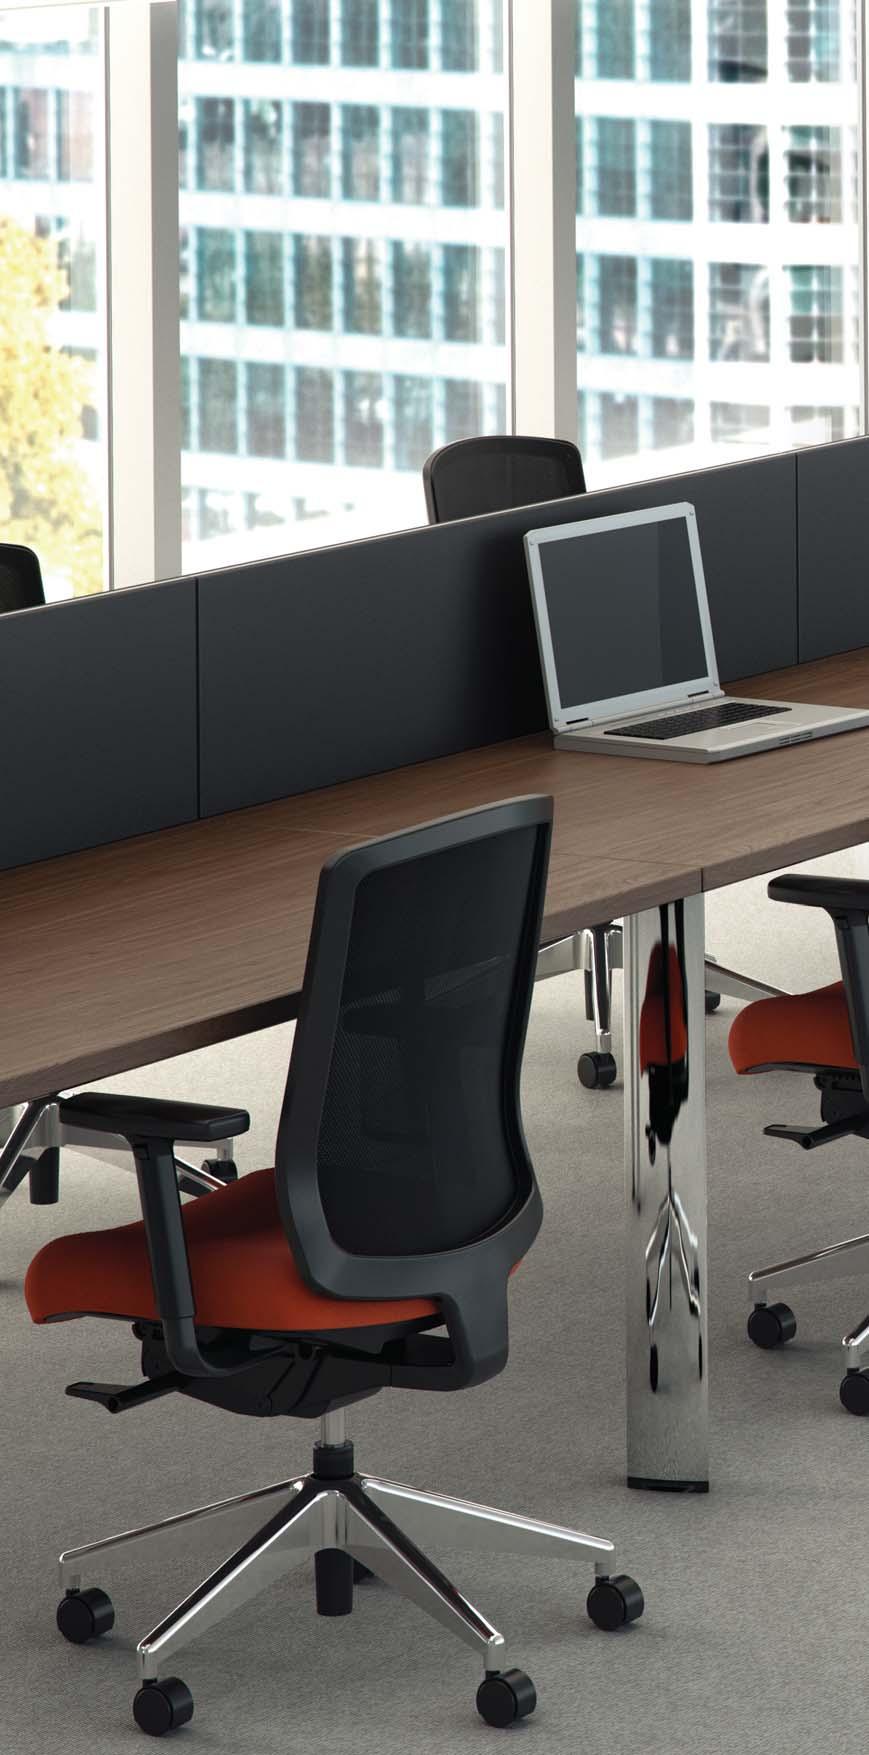 Vite is the ideal work chair for the modern